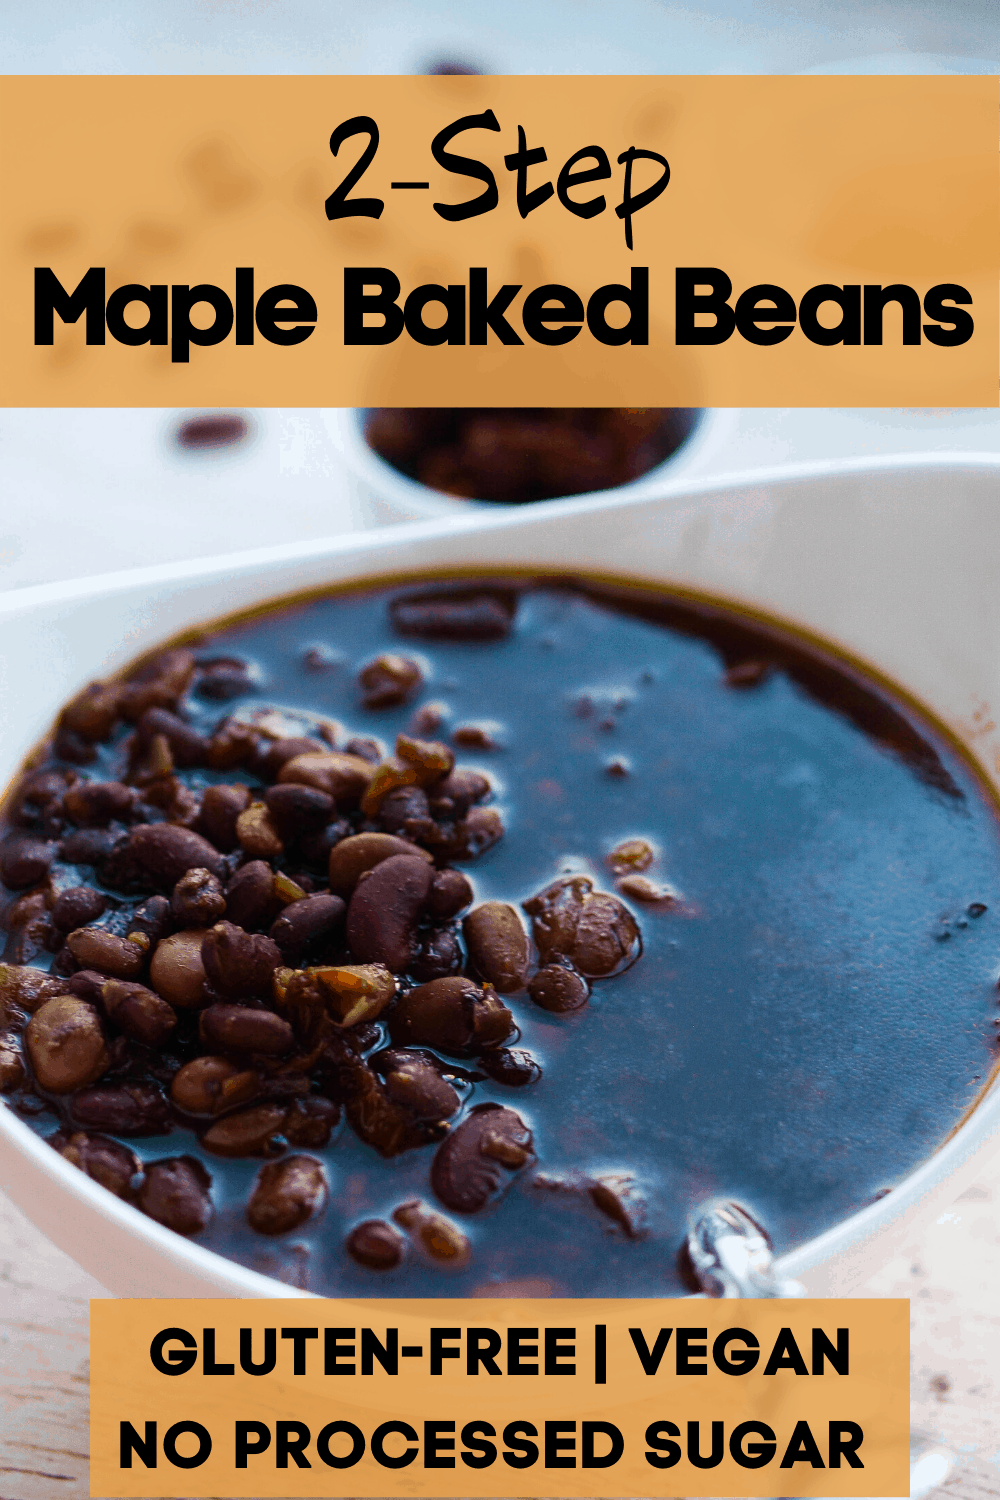 A pinterest pin for maple baked beans. On the picture is a large bowl of maple baked beans.